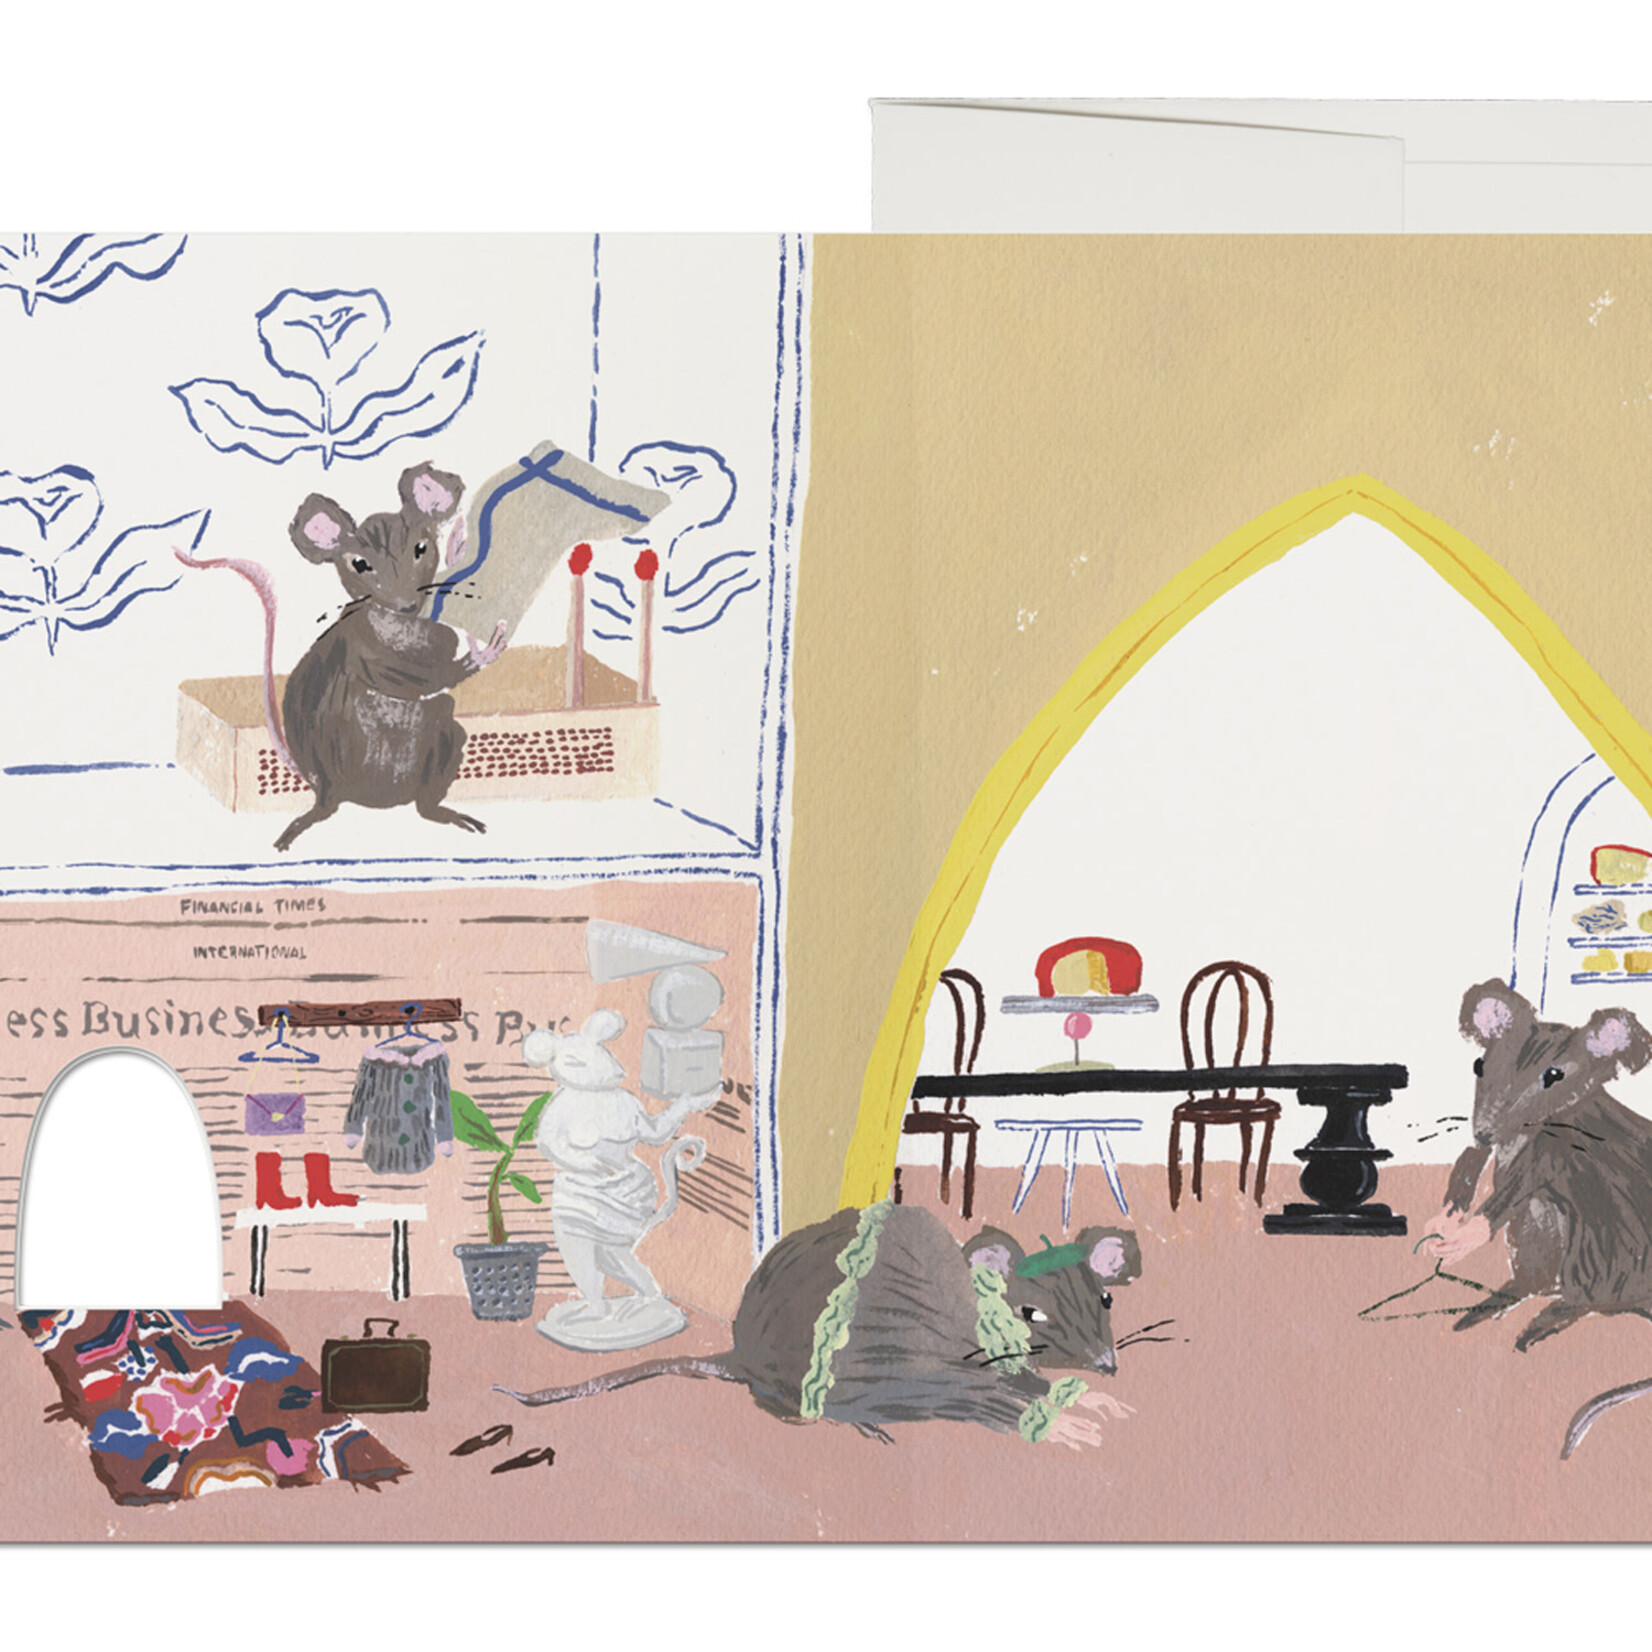 Mouse House Thank You Card